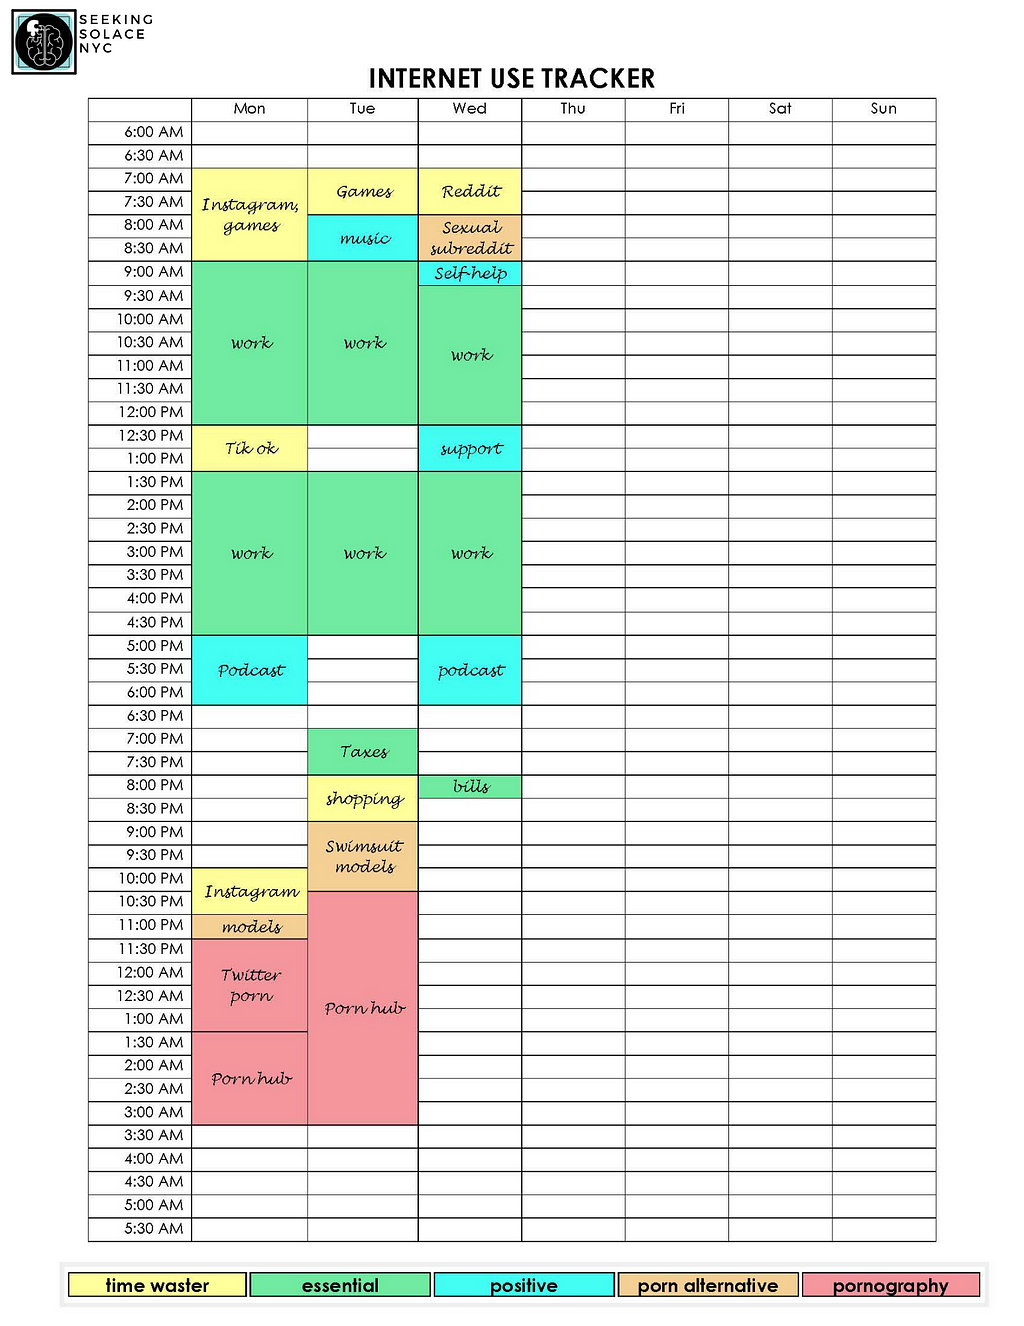 color coded Internet use tracker spreadsheet to monitor time spent on time-wasters, essential tasks, positive activities, pornography alternatives and sexually explicit material.